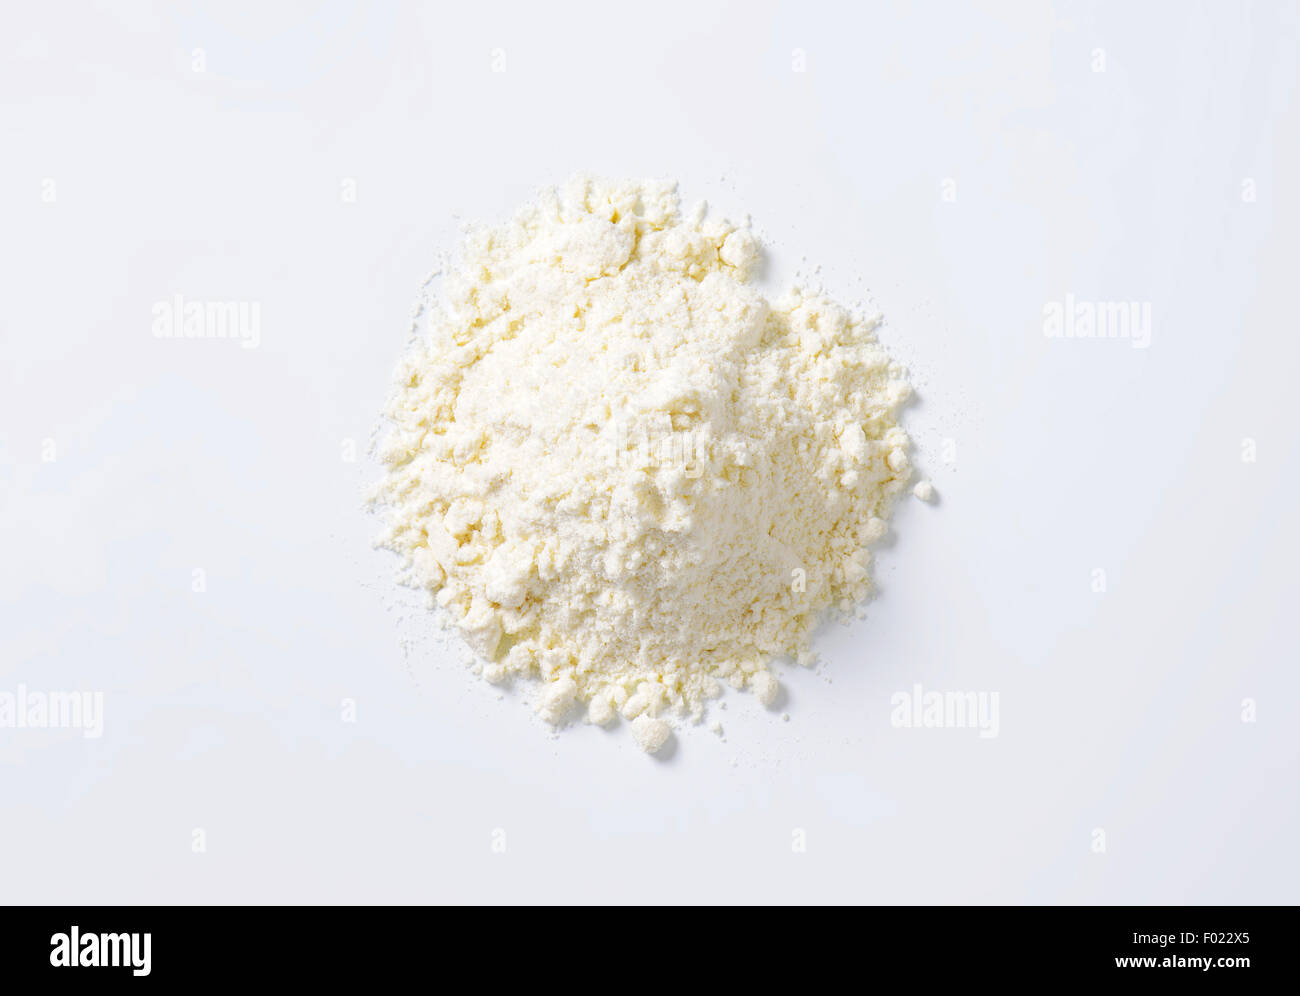 Pile of finely ground flour suitable for cake recipes Stock Photo